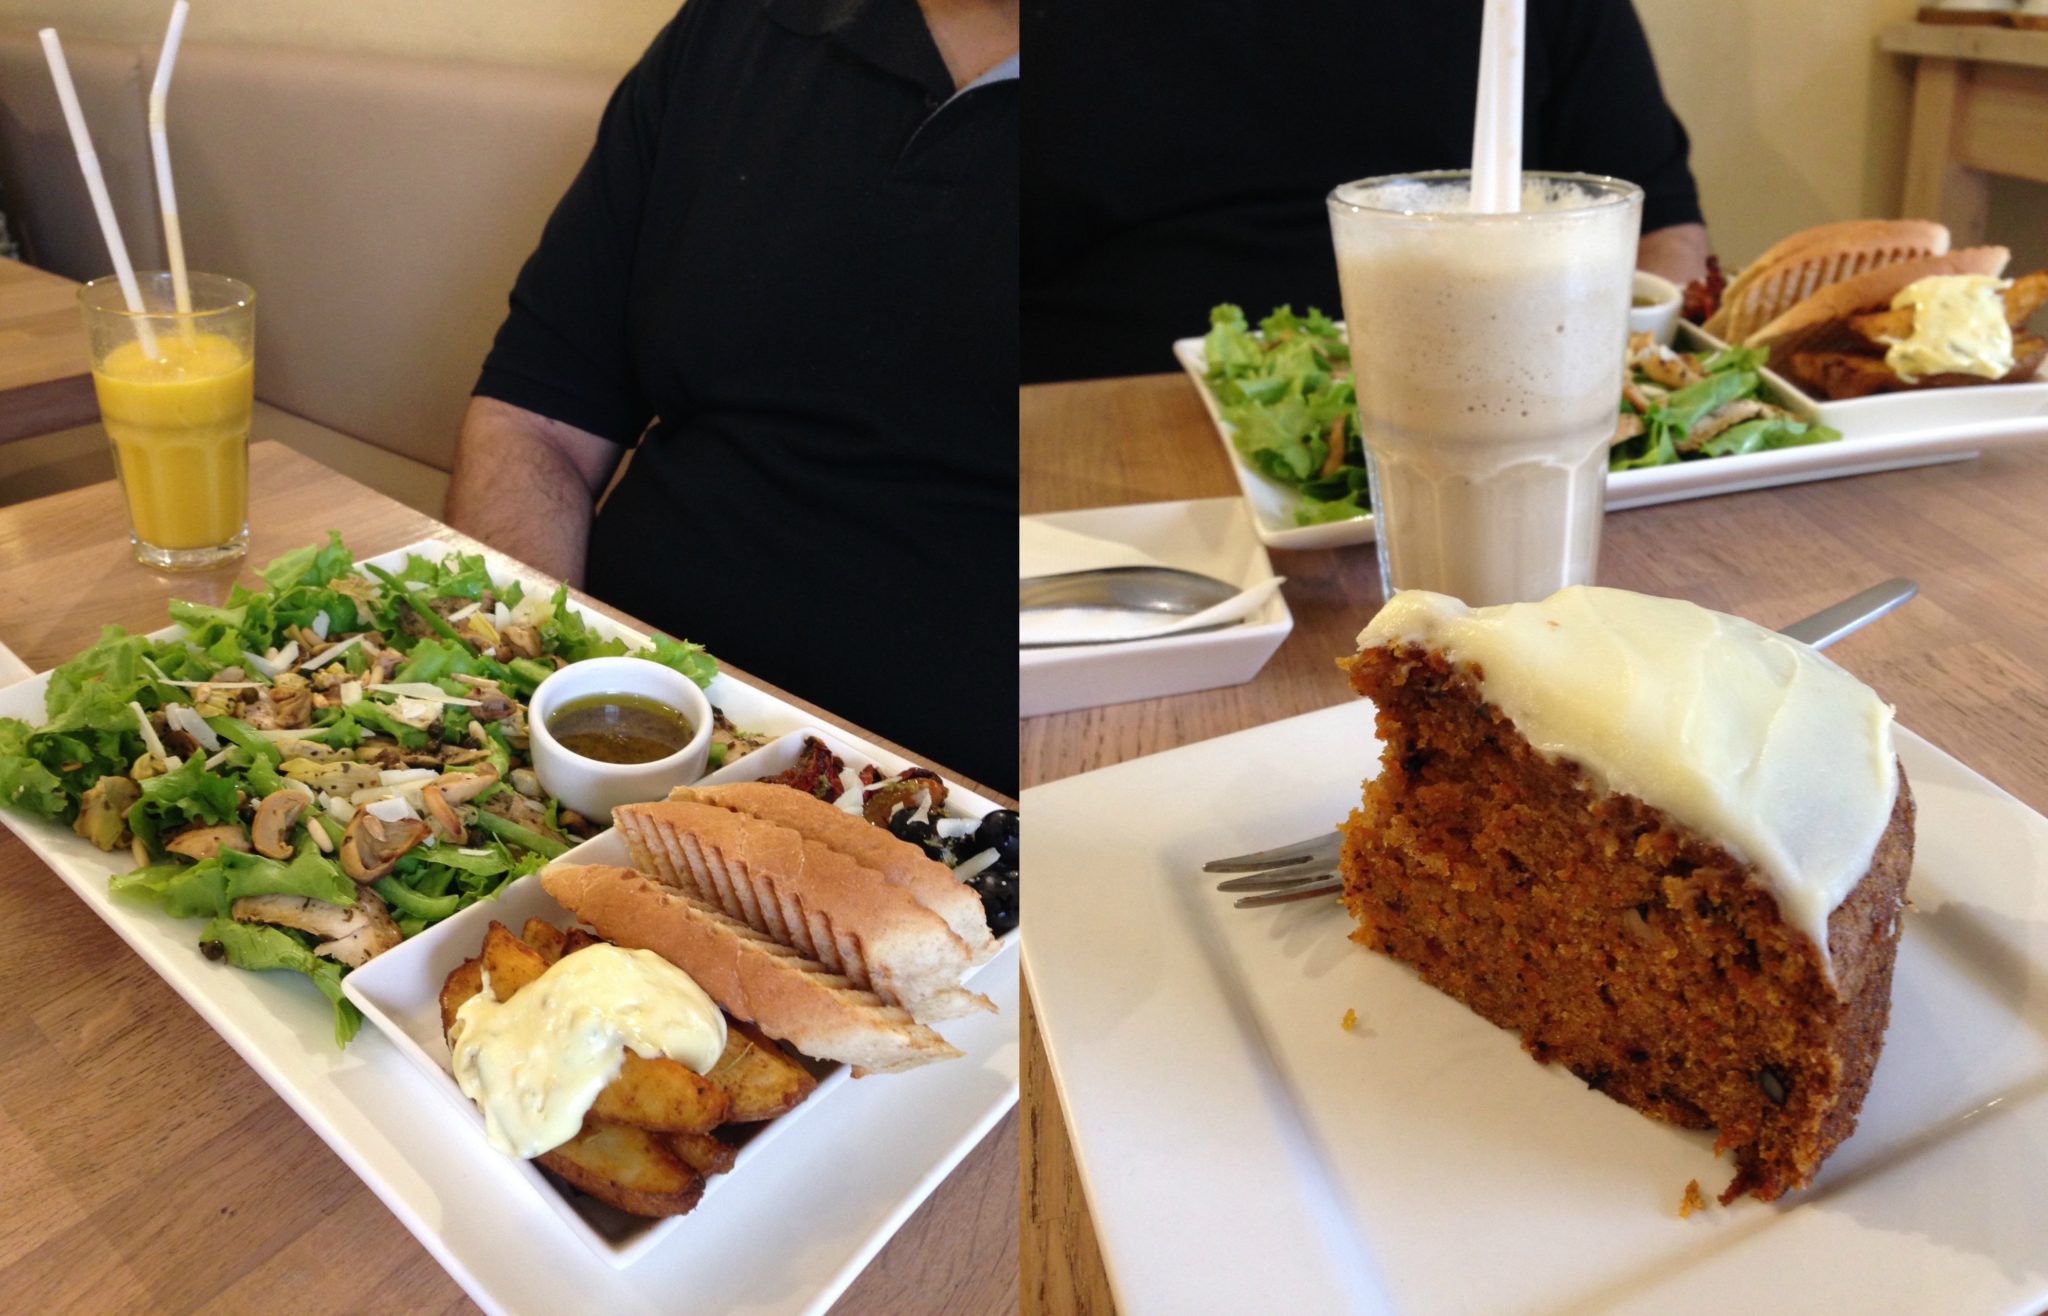 Salad and fresh juice, or carrot cake with iced latte at Mocca